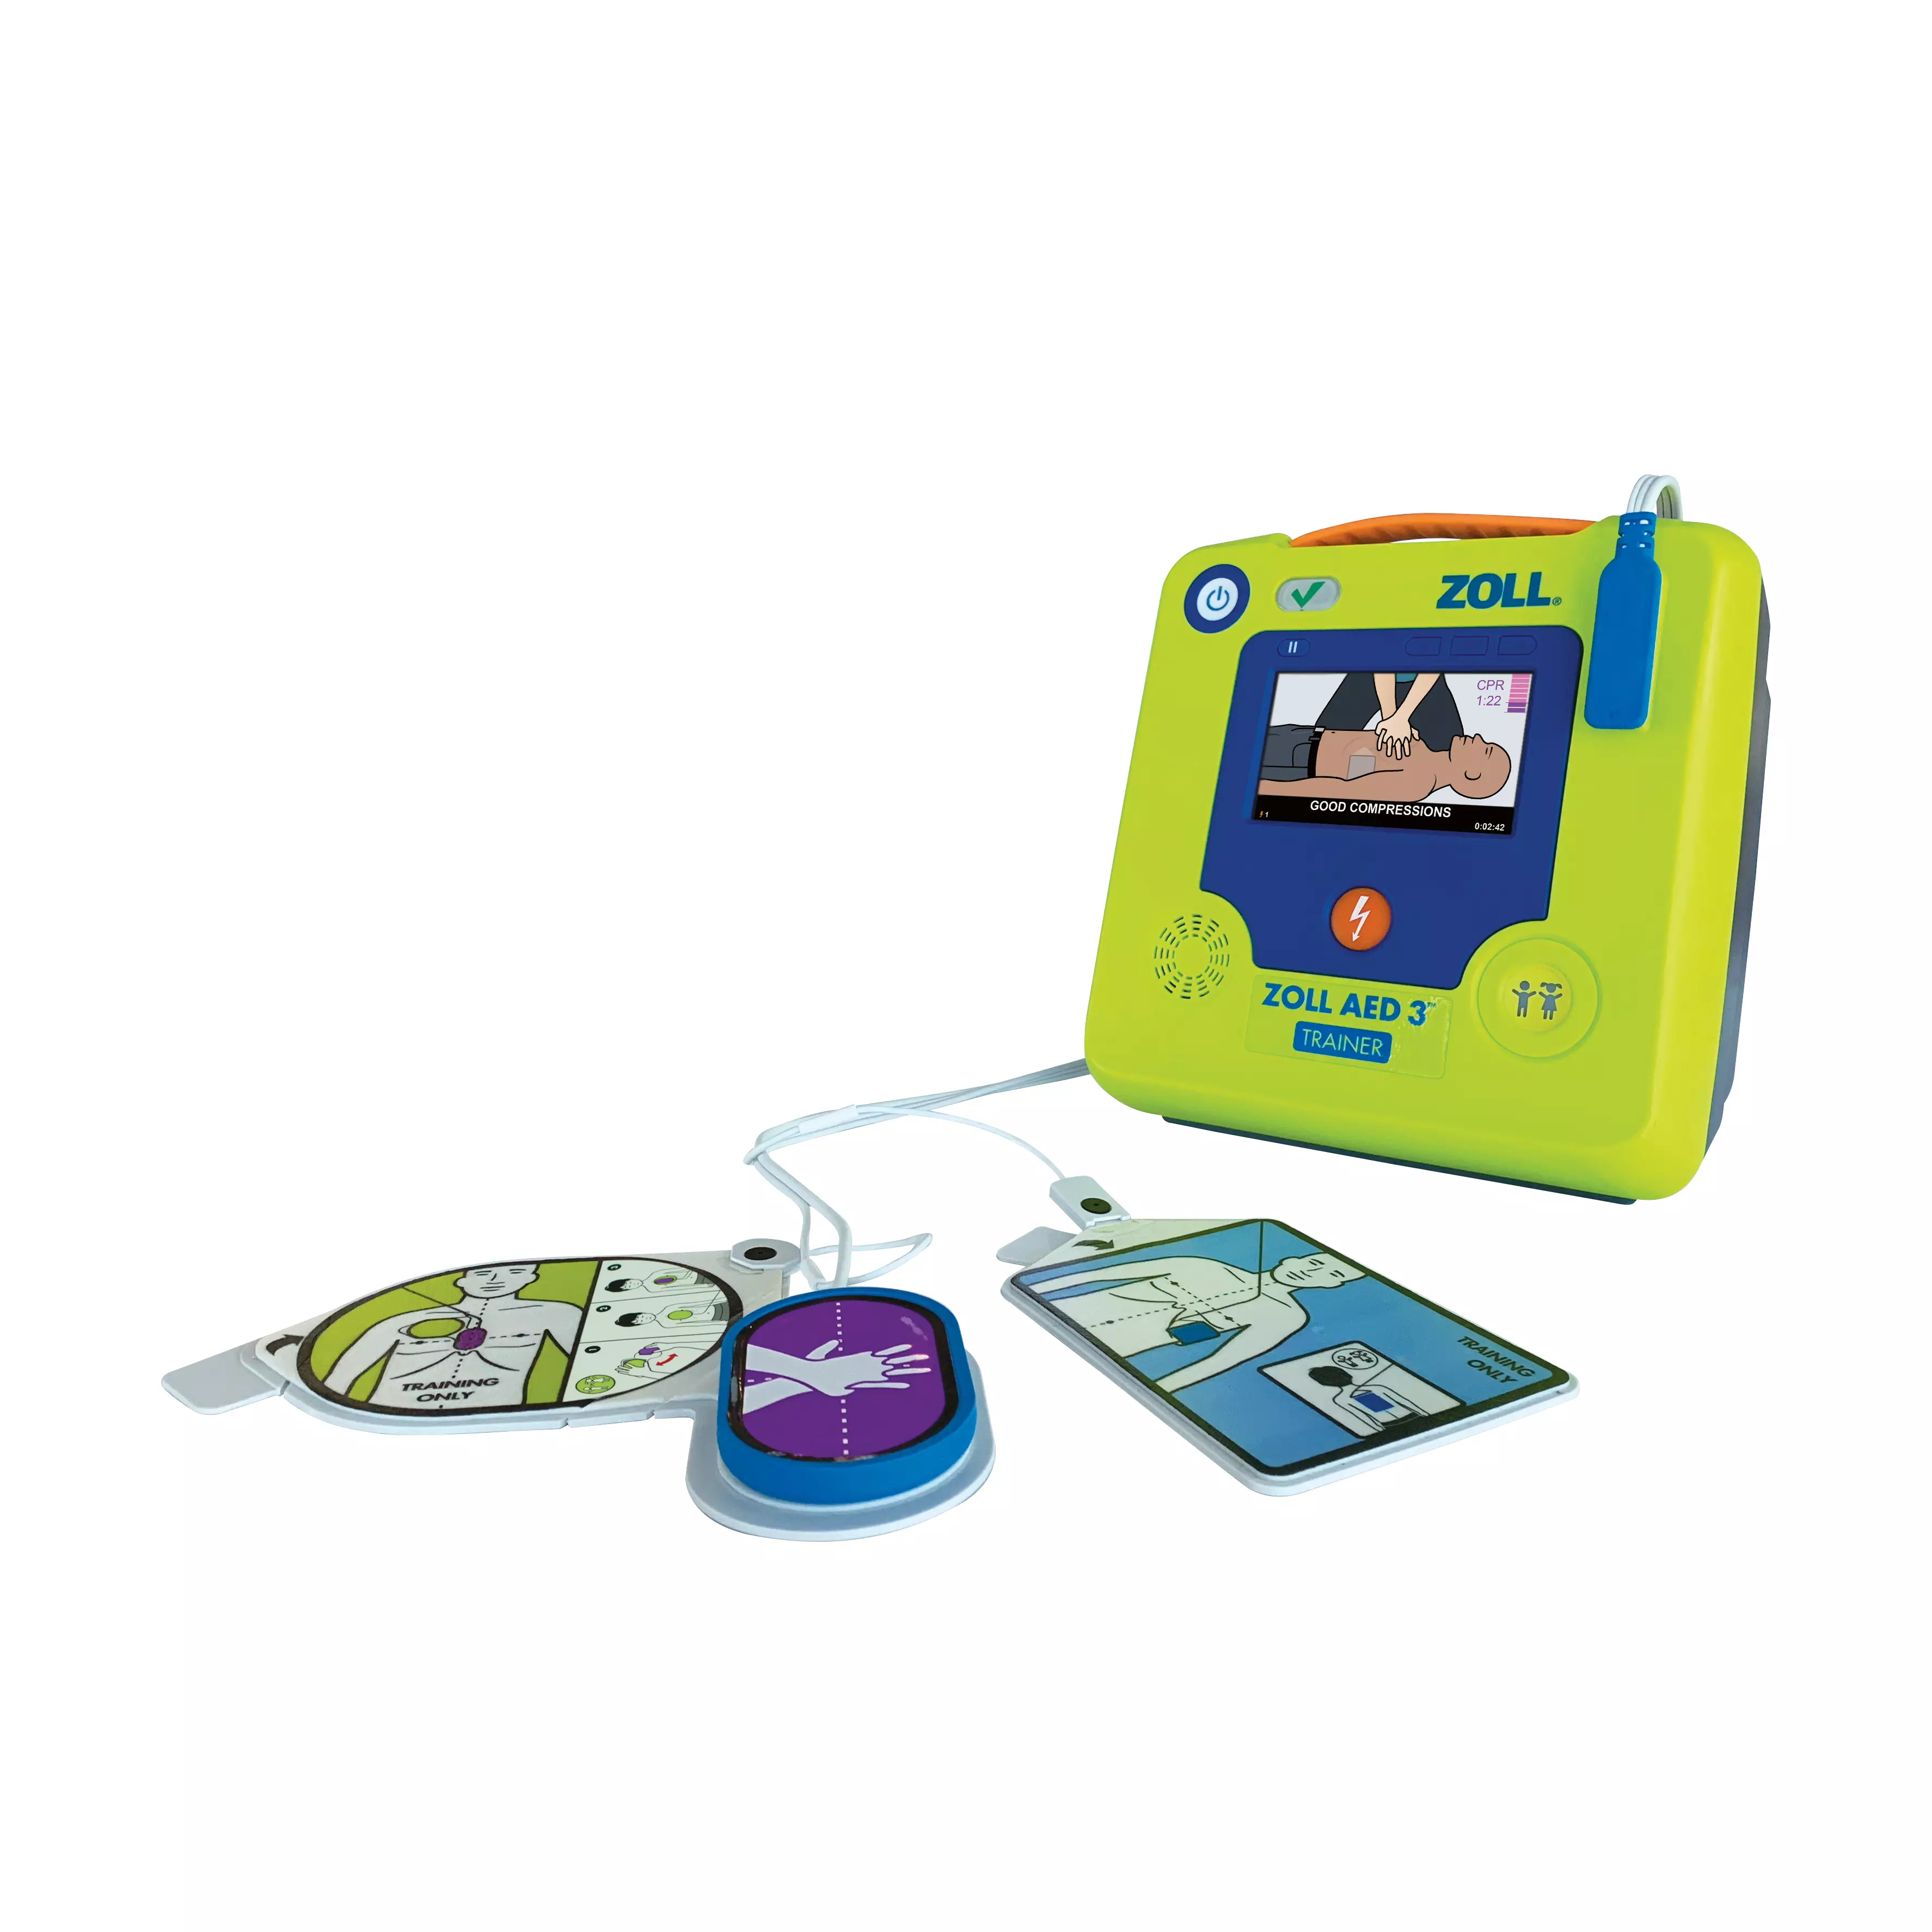 ZOLL AED 3 Trainer training device incl. CPR Uni-padz training electrode